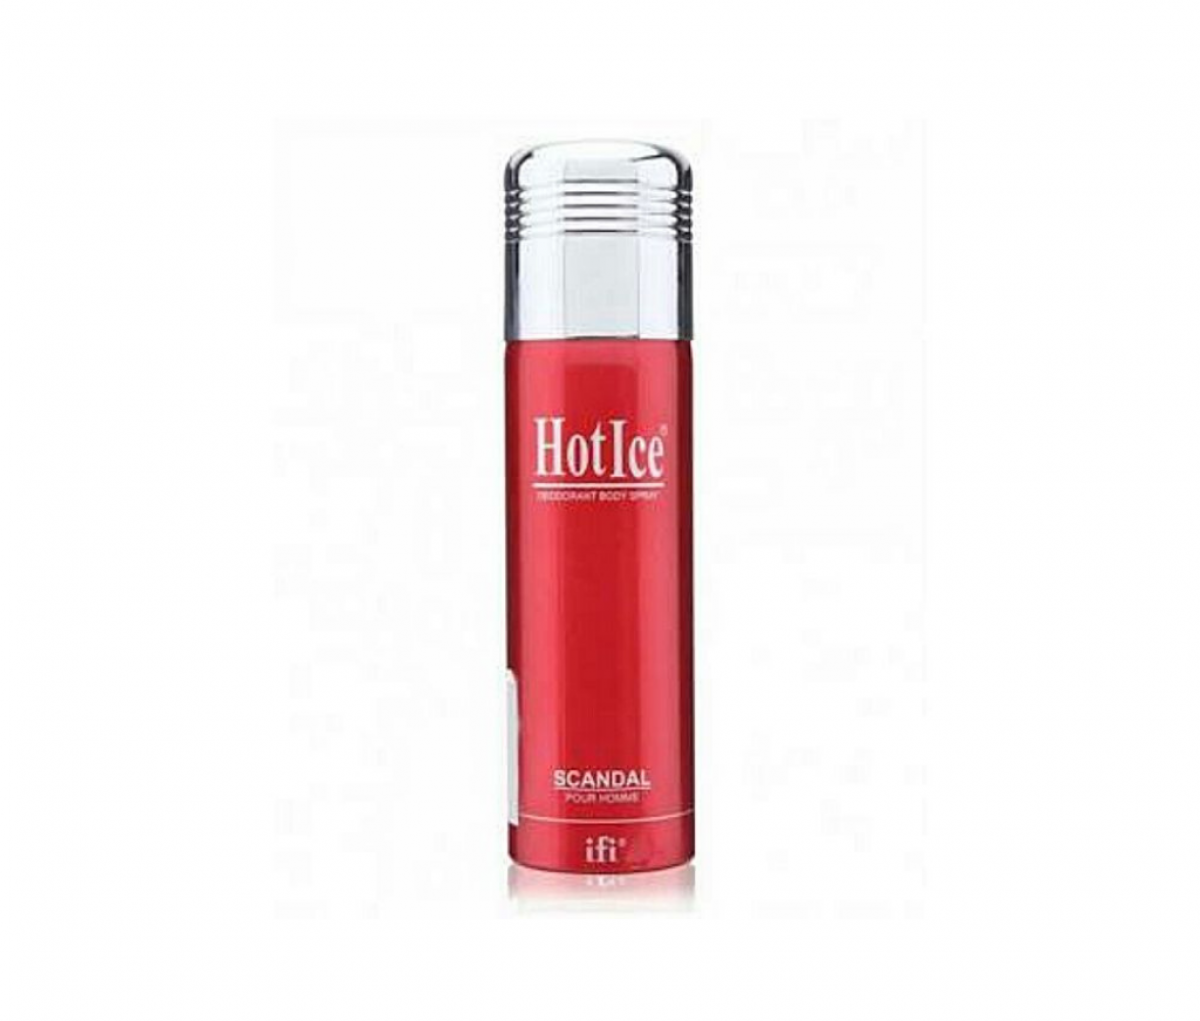 Hot Ice Deo 200ml Scandal